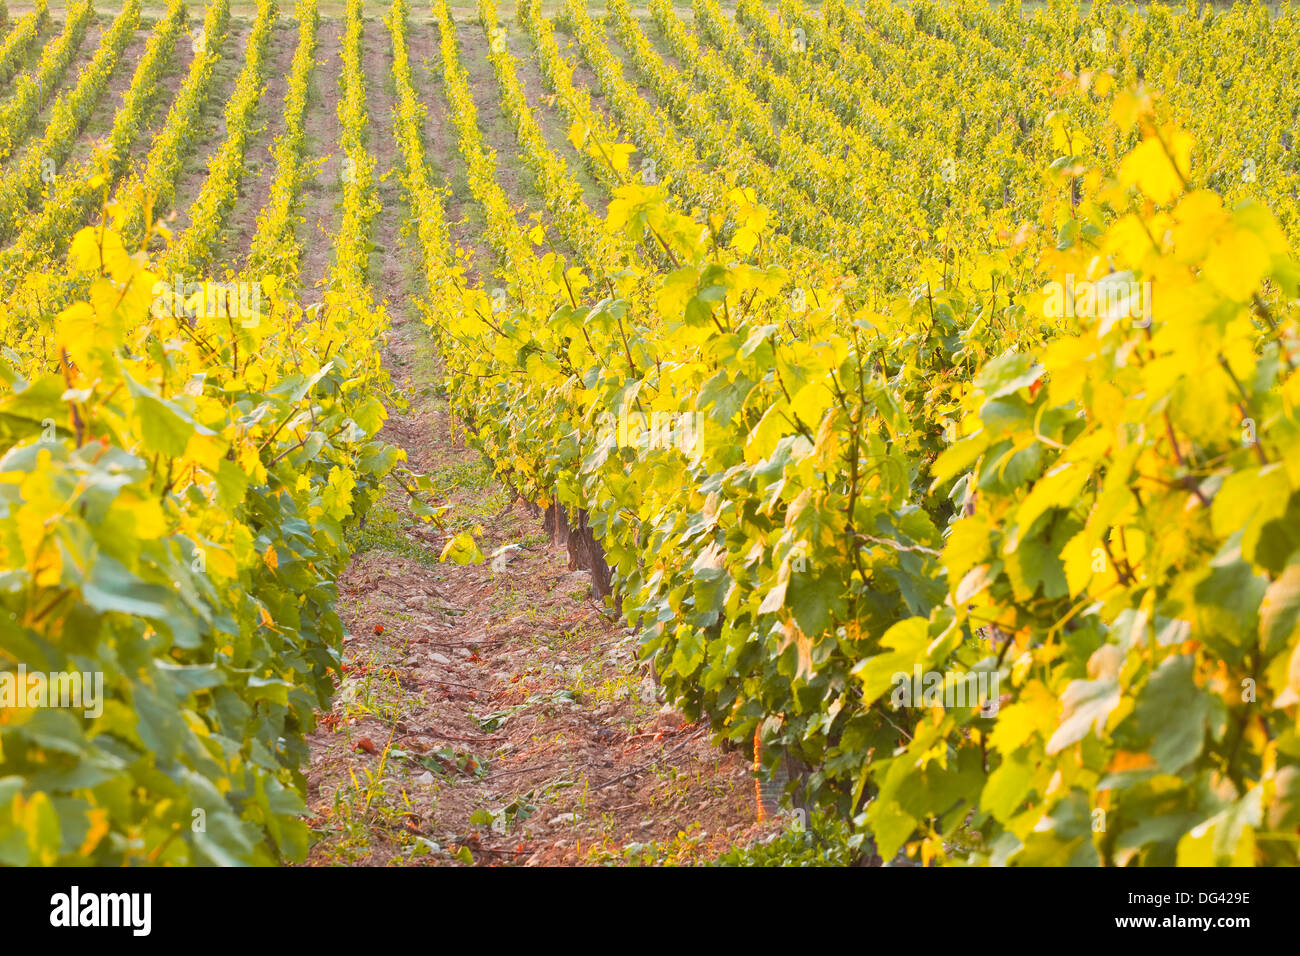 Rows of grape vines in vineyard near to Vezelay in Burgundy, France, Europe Stock Photo